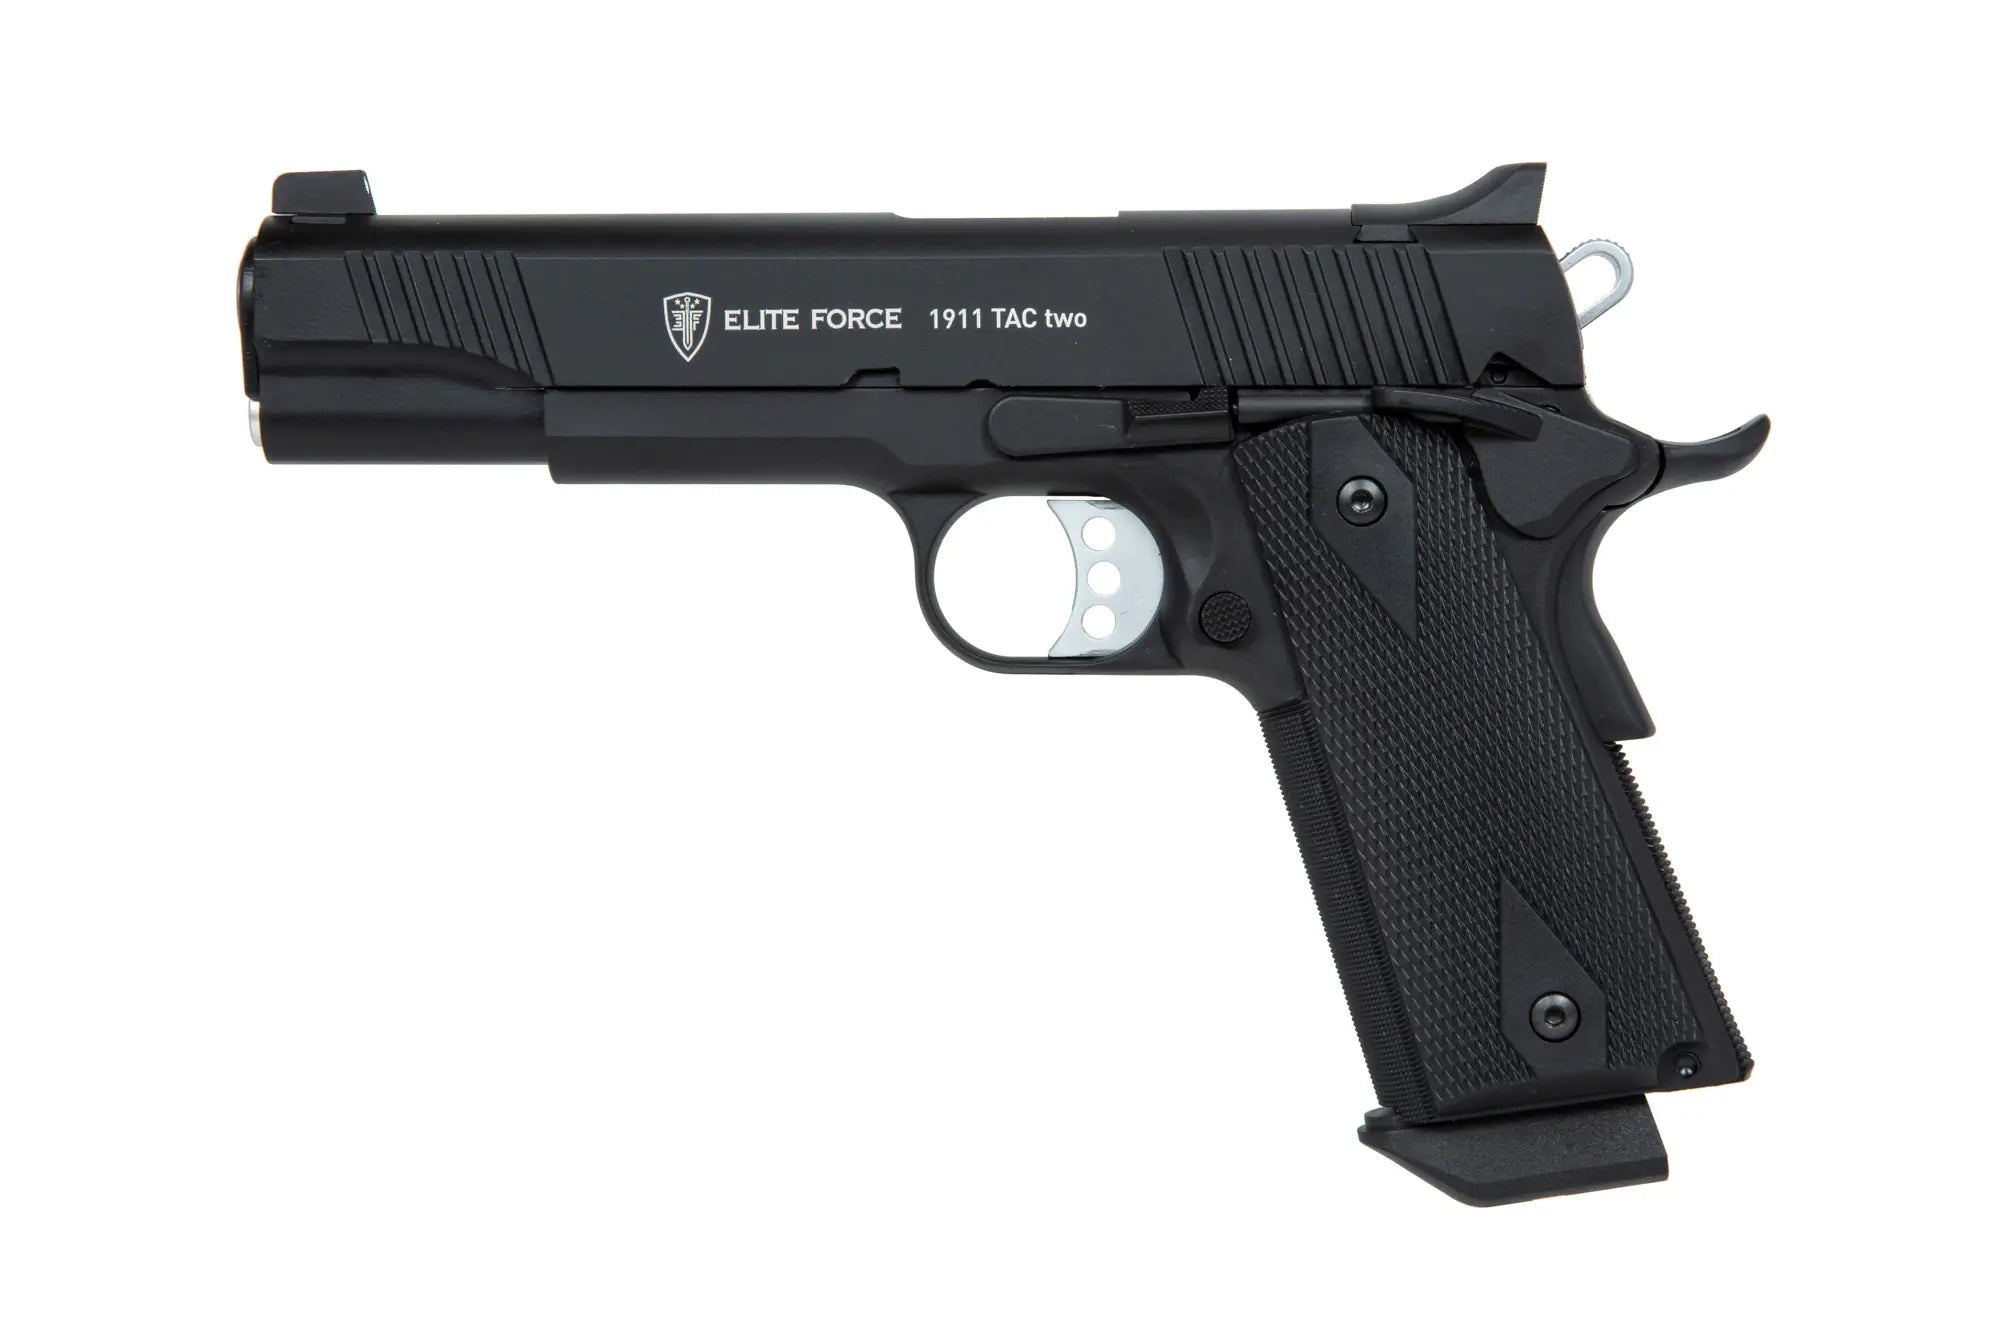 ELITE FORCE (Umarex) Airsoft GBB 1911 Tac Two / 2.6499